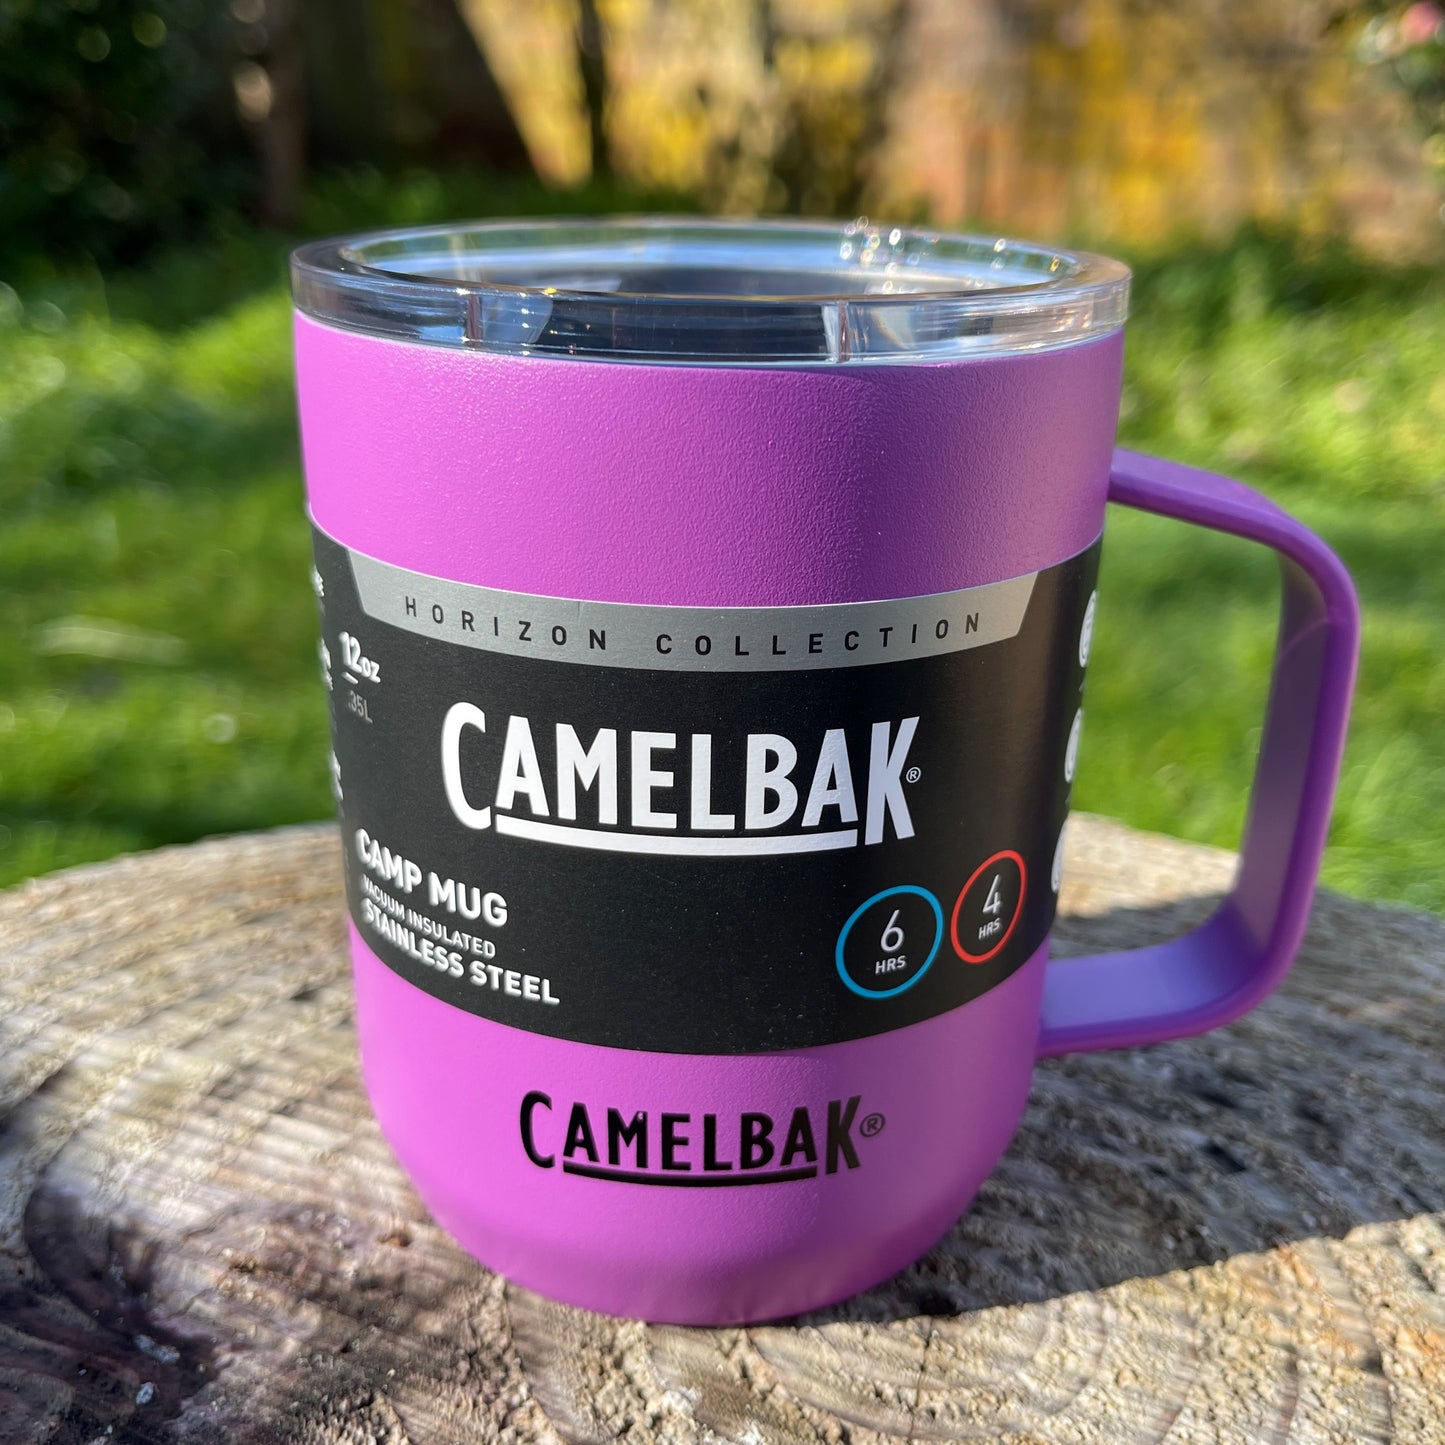 Camelbak magenta pink stainless camping mug with lid and handle.